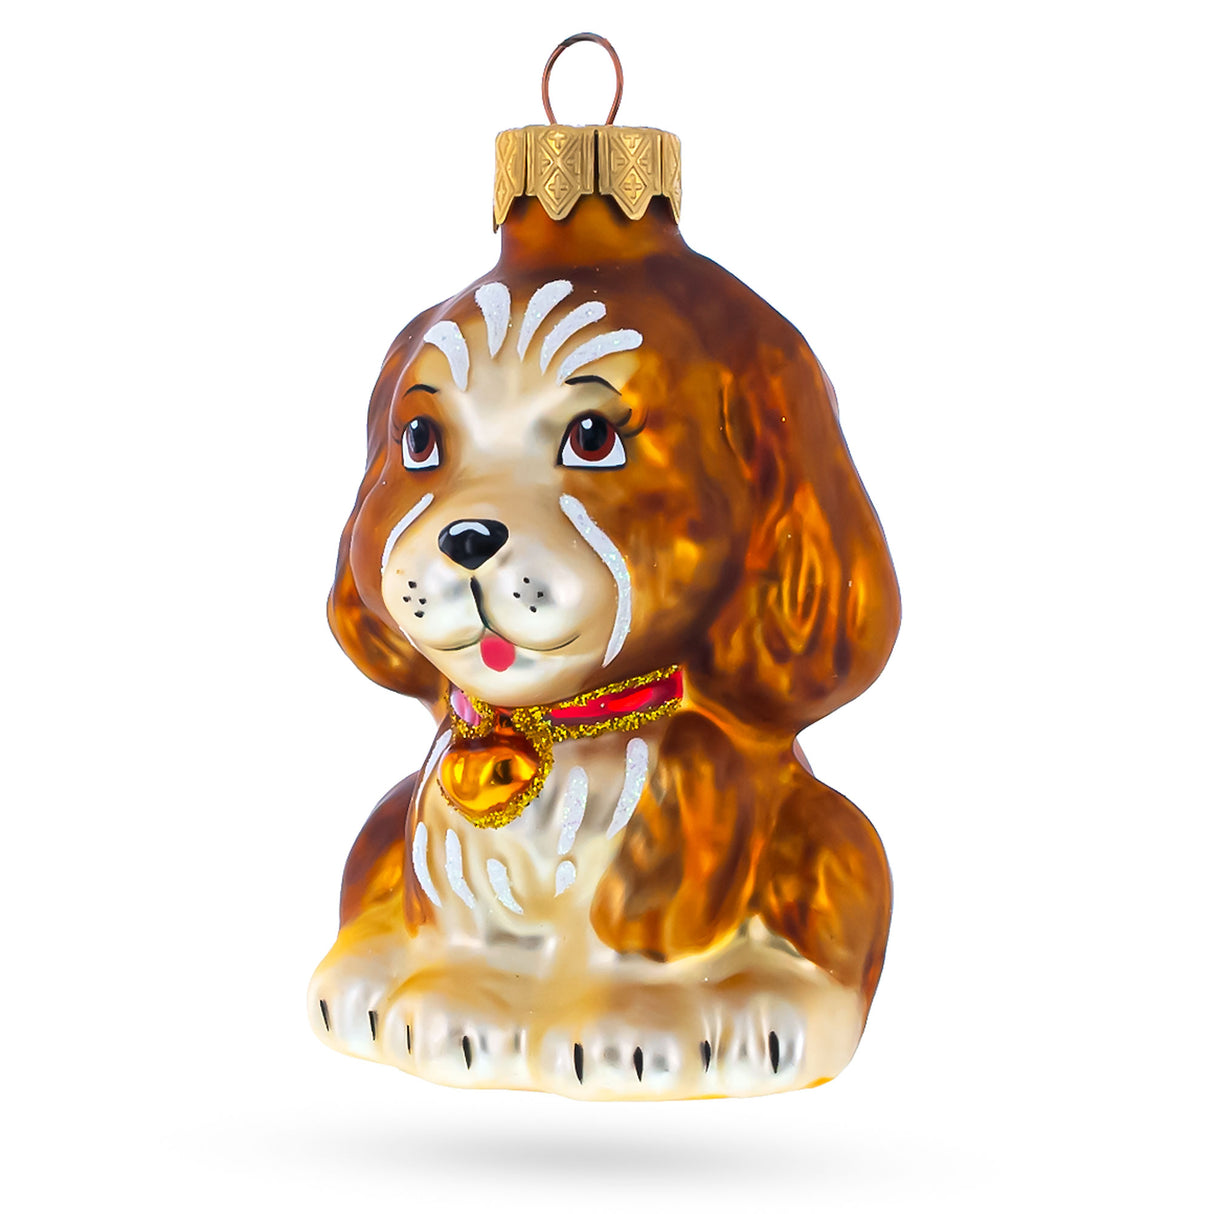 Glass Puppy with Heart on Collar Glass Christmas Ornament in Brown color